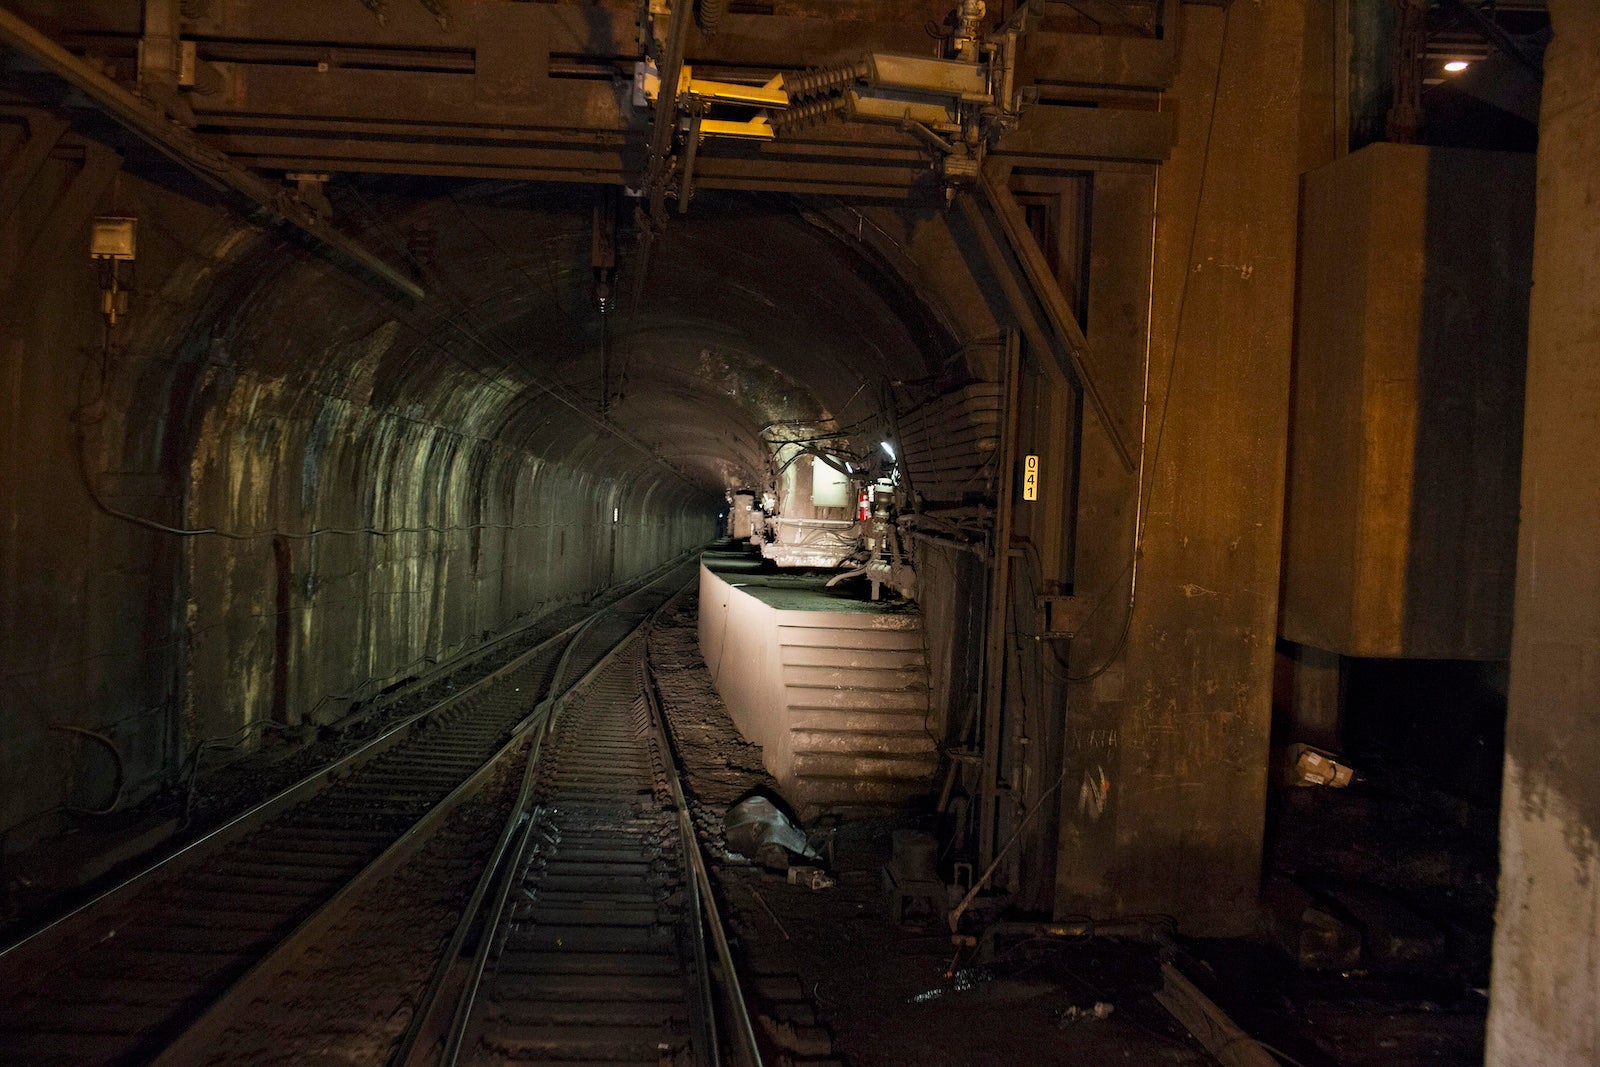 The north tube of the North River Tunnel under the Hudson River in New York